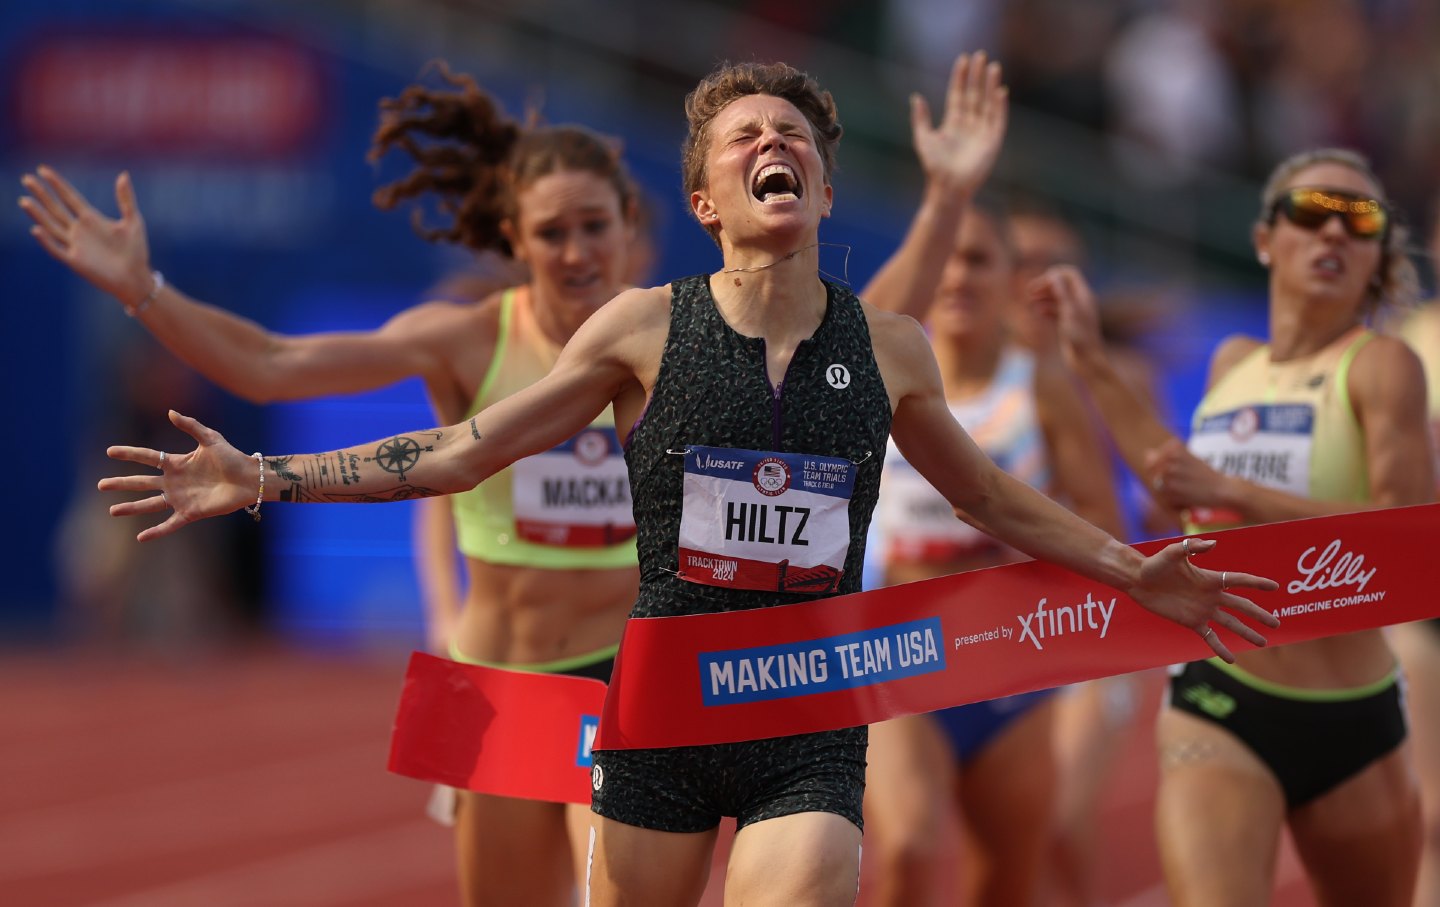 Nikki Hiltz celebrates crossing the finish line to win the women's 1500 meter final at the 2024 US Olympic Team Track & Field Trials at Hayward Field on June 30, 2024 in Eugene, Oregon.